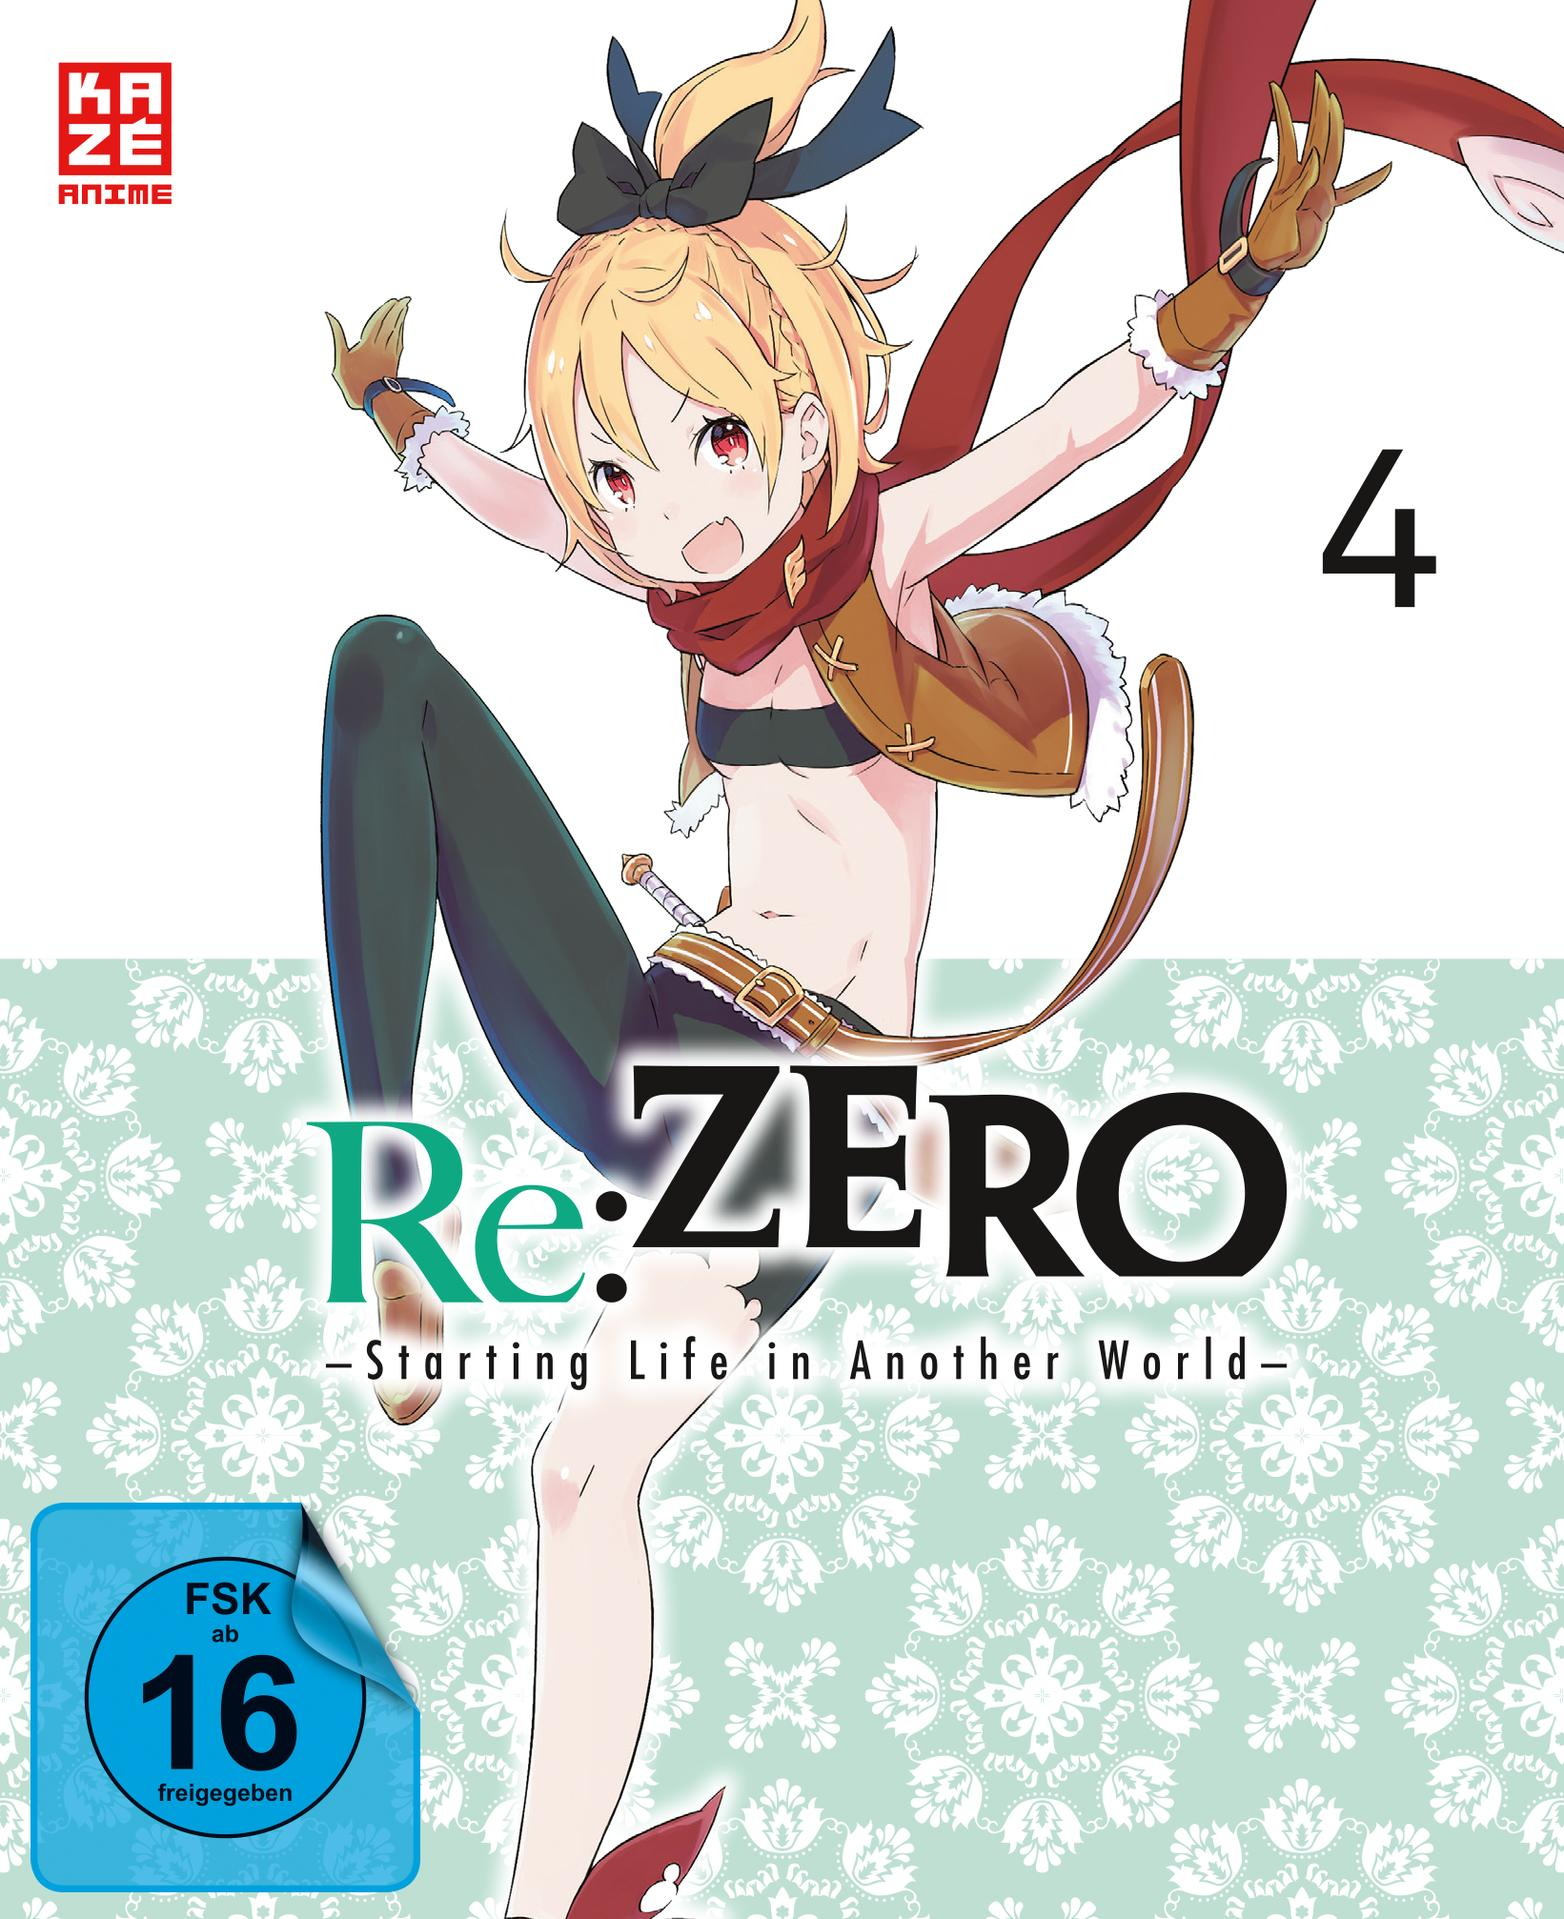 DVD - Vol. Another World re:ZERO - Ep. in - 4 16-20 Life Starting